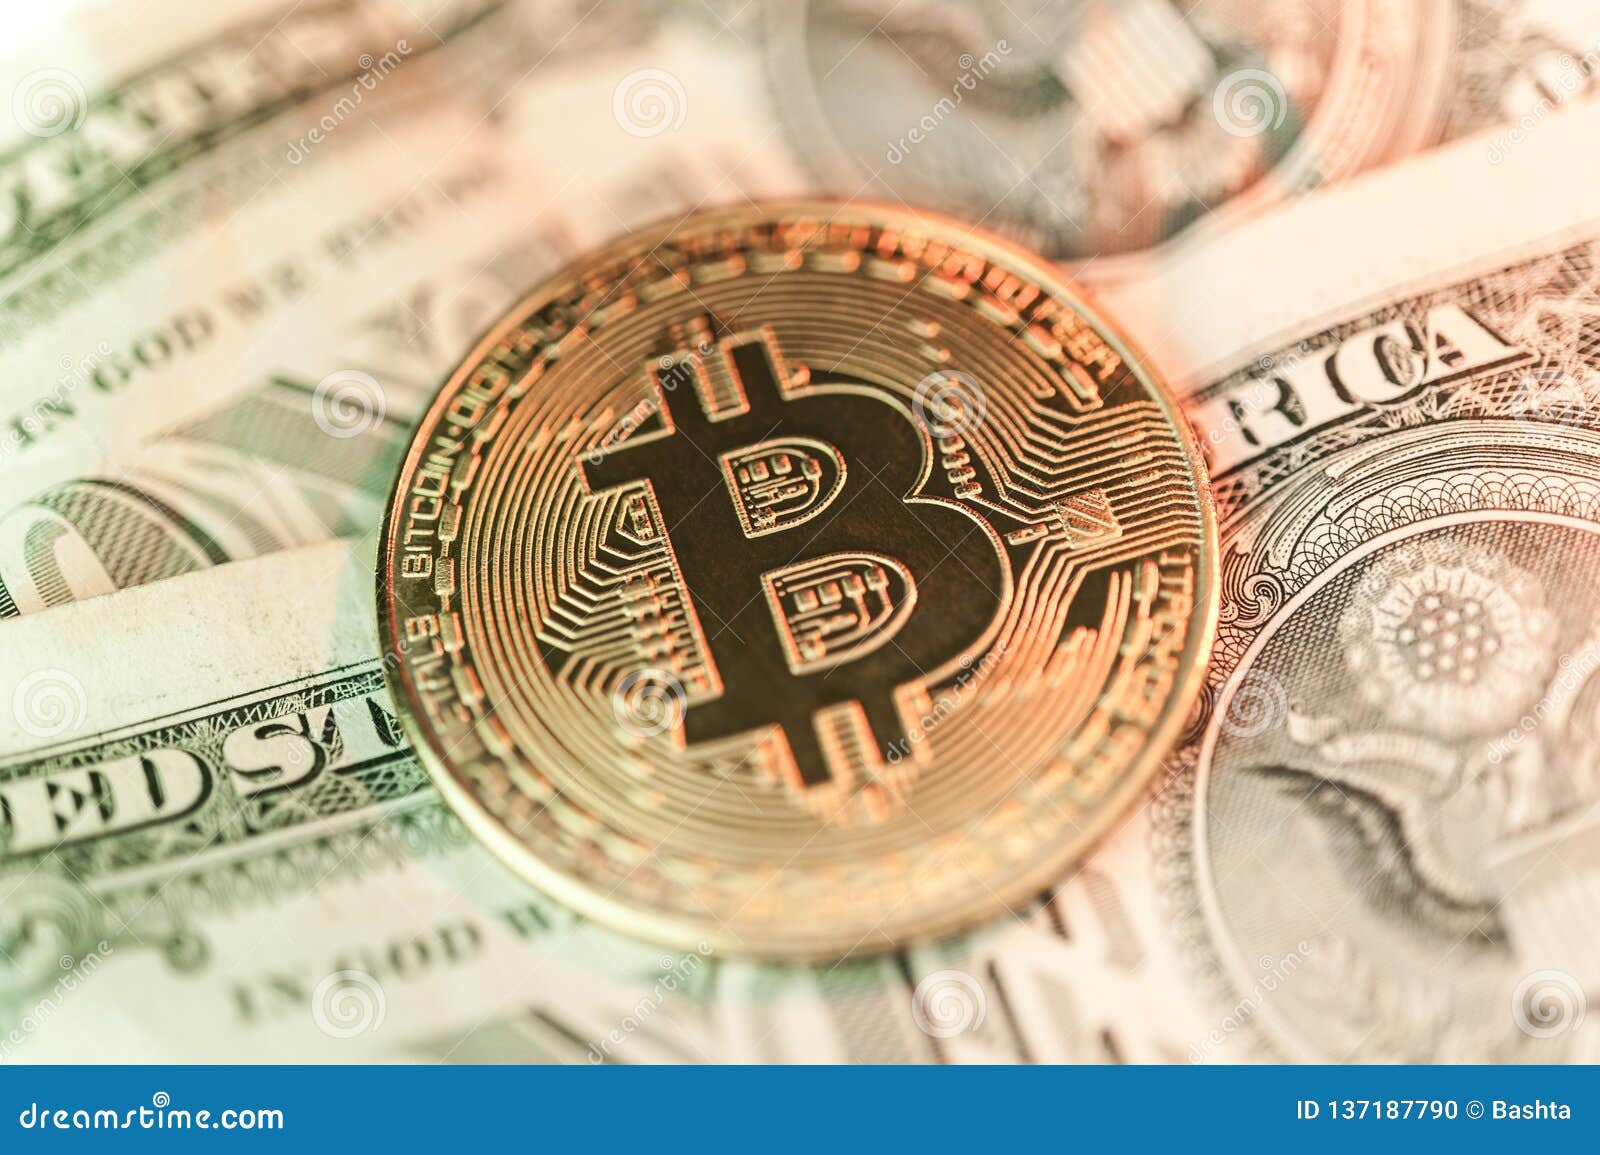 Exchange Bitcoin For A Dollar. Finance Background. Stock ...